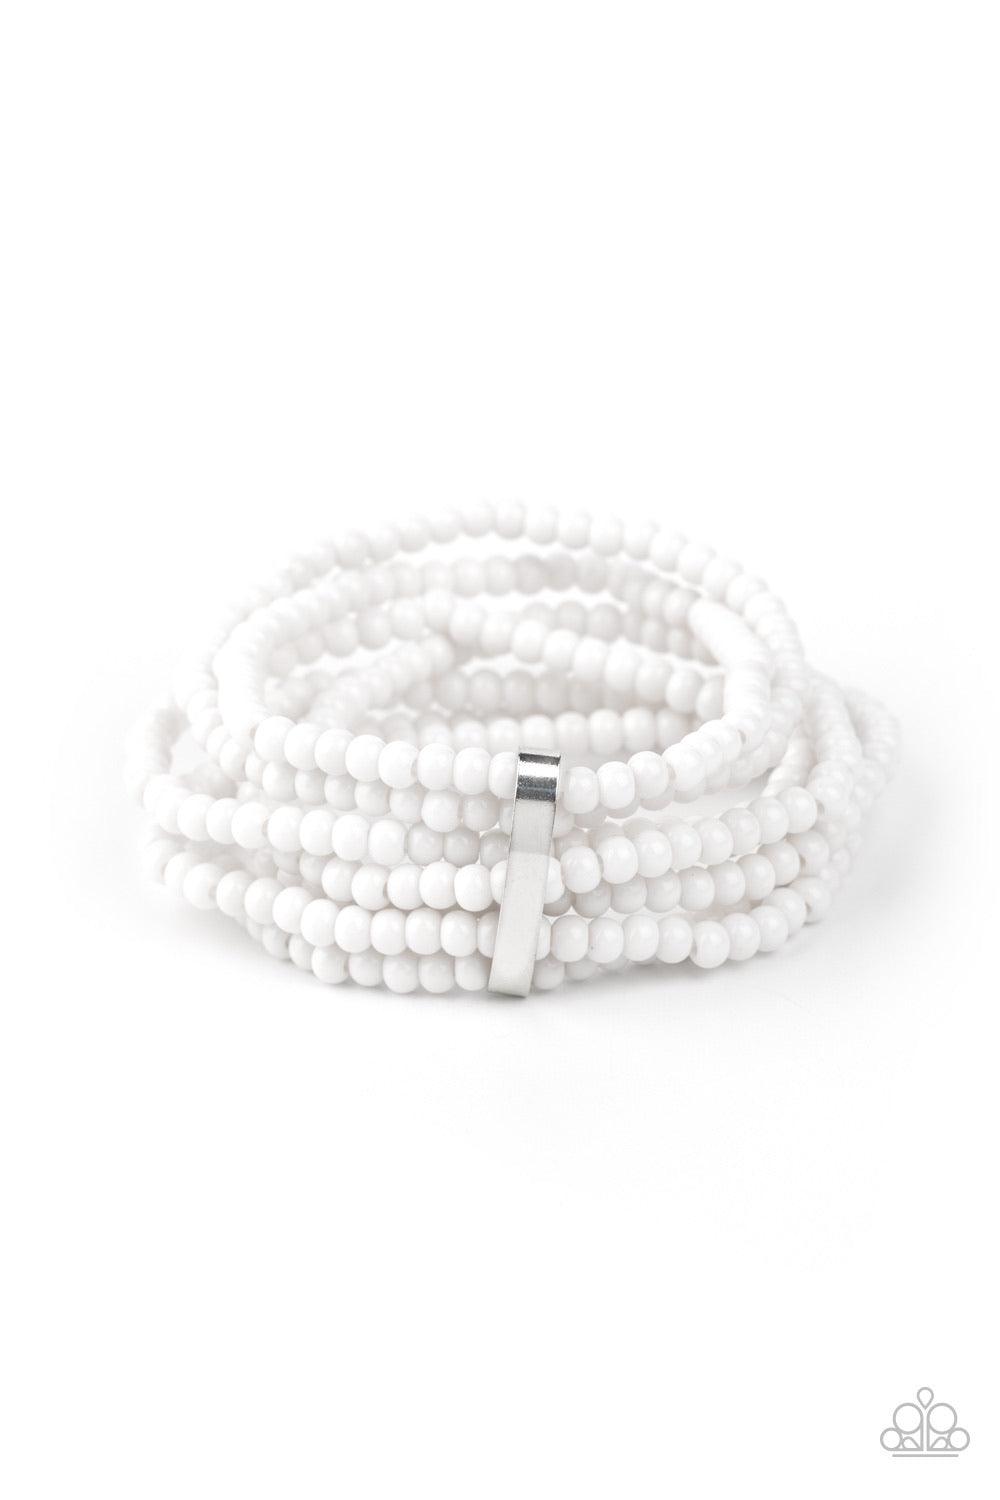 Paparazzi Accessories Thank Me LAYER - White Held together by a dainty silver fitting, a casual collection of white beads are threaded along stretchy bands around the wrist, creating colorful layers. Sold as one individual bracelet. Jewelry